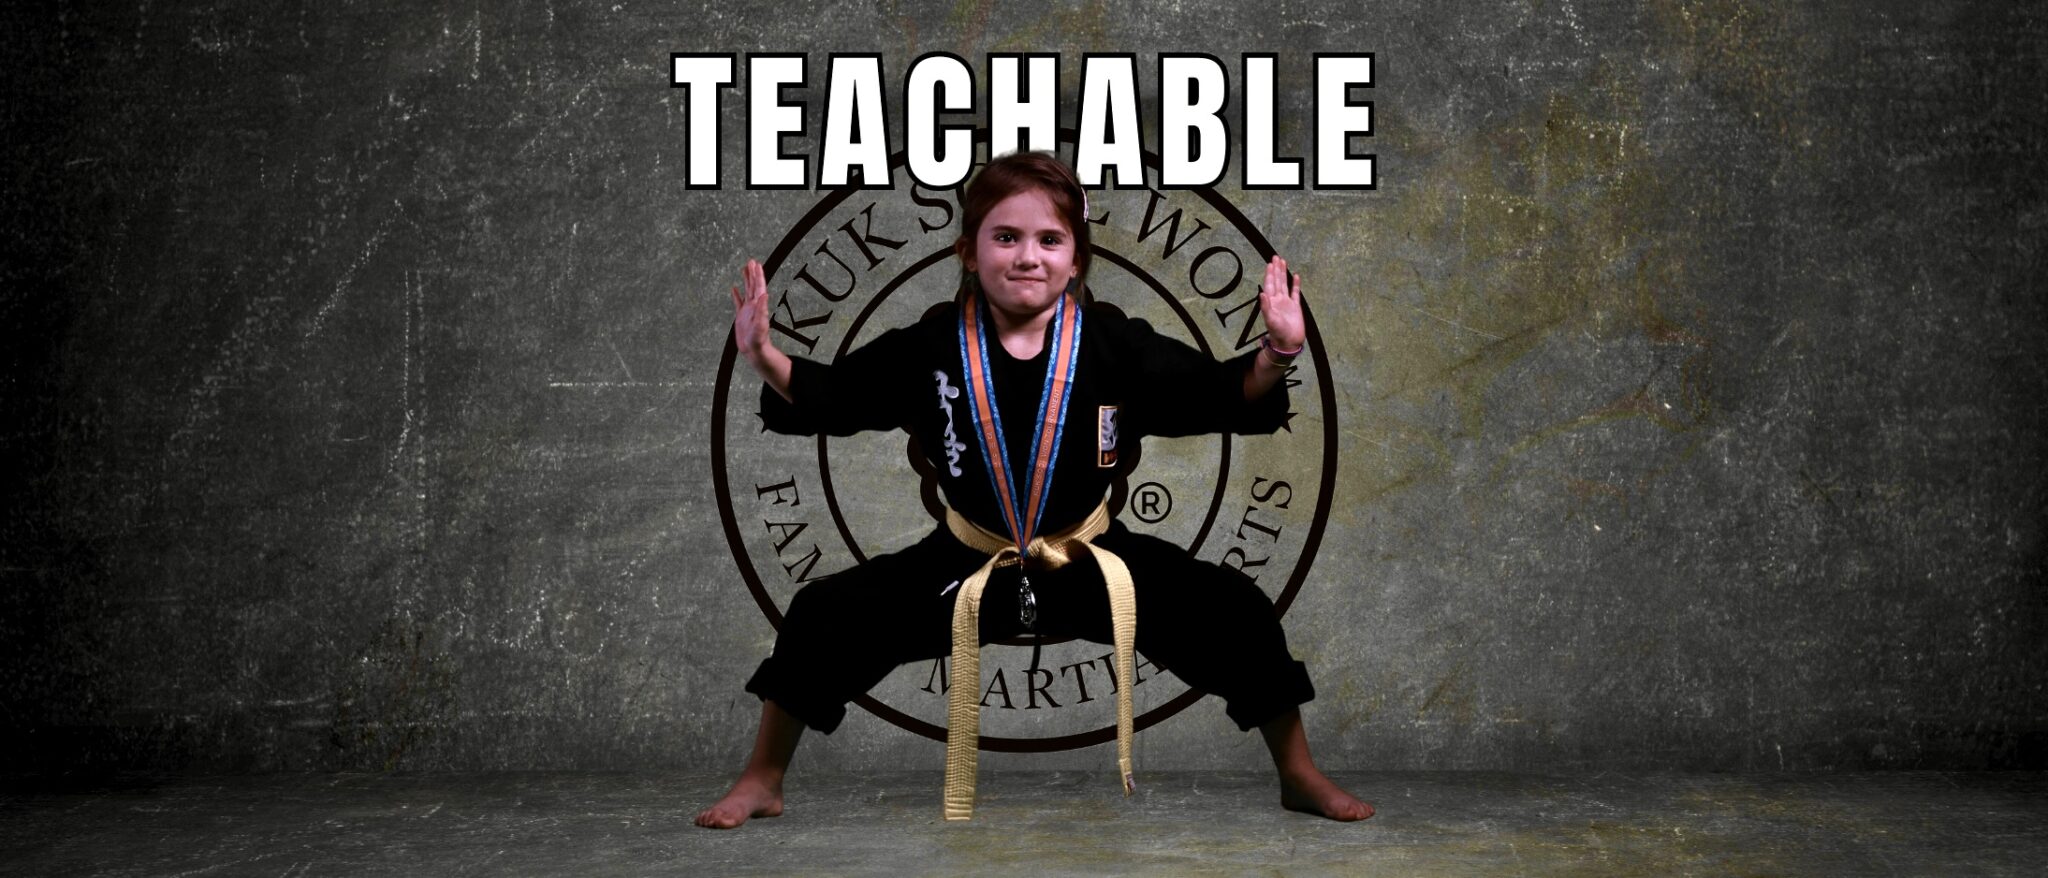 The Power of Being Teachable in Sherman Oaks: Join Our Martial Art Success Team